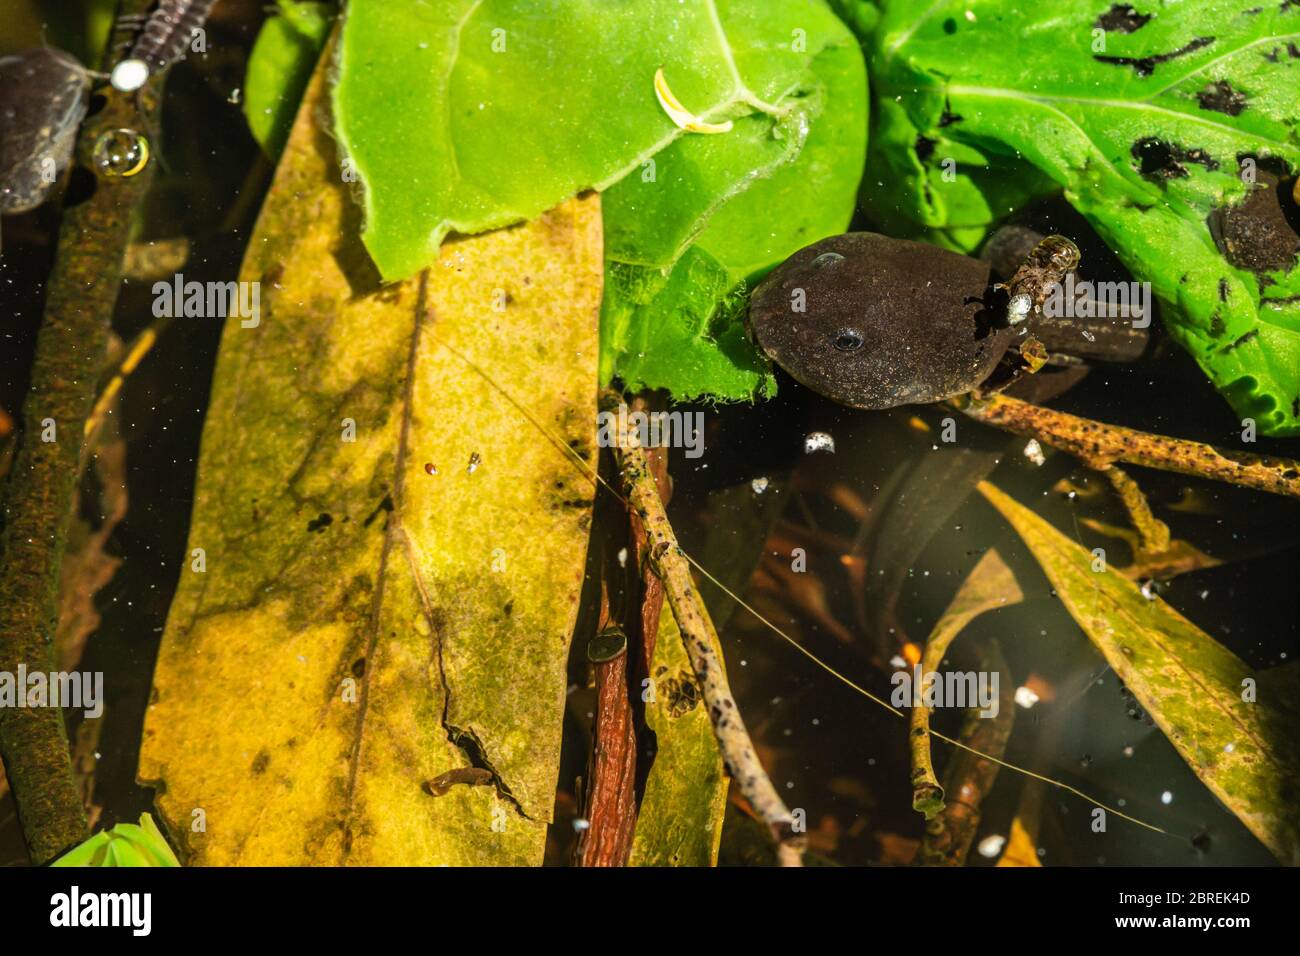 Common frog tadpole grazing on Spinach leaves in wildlife pond. Stock Photo